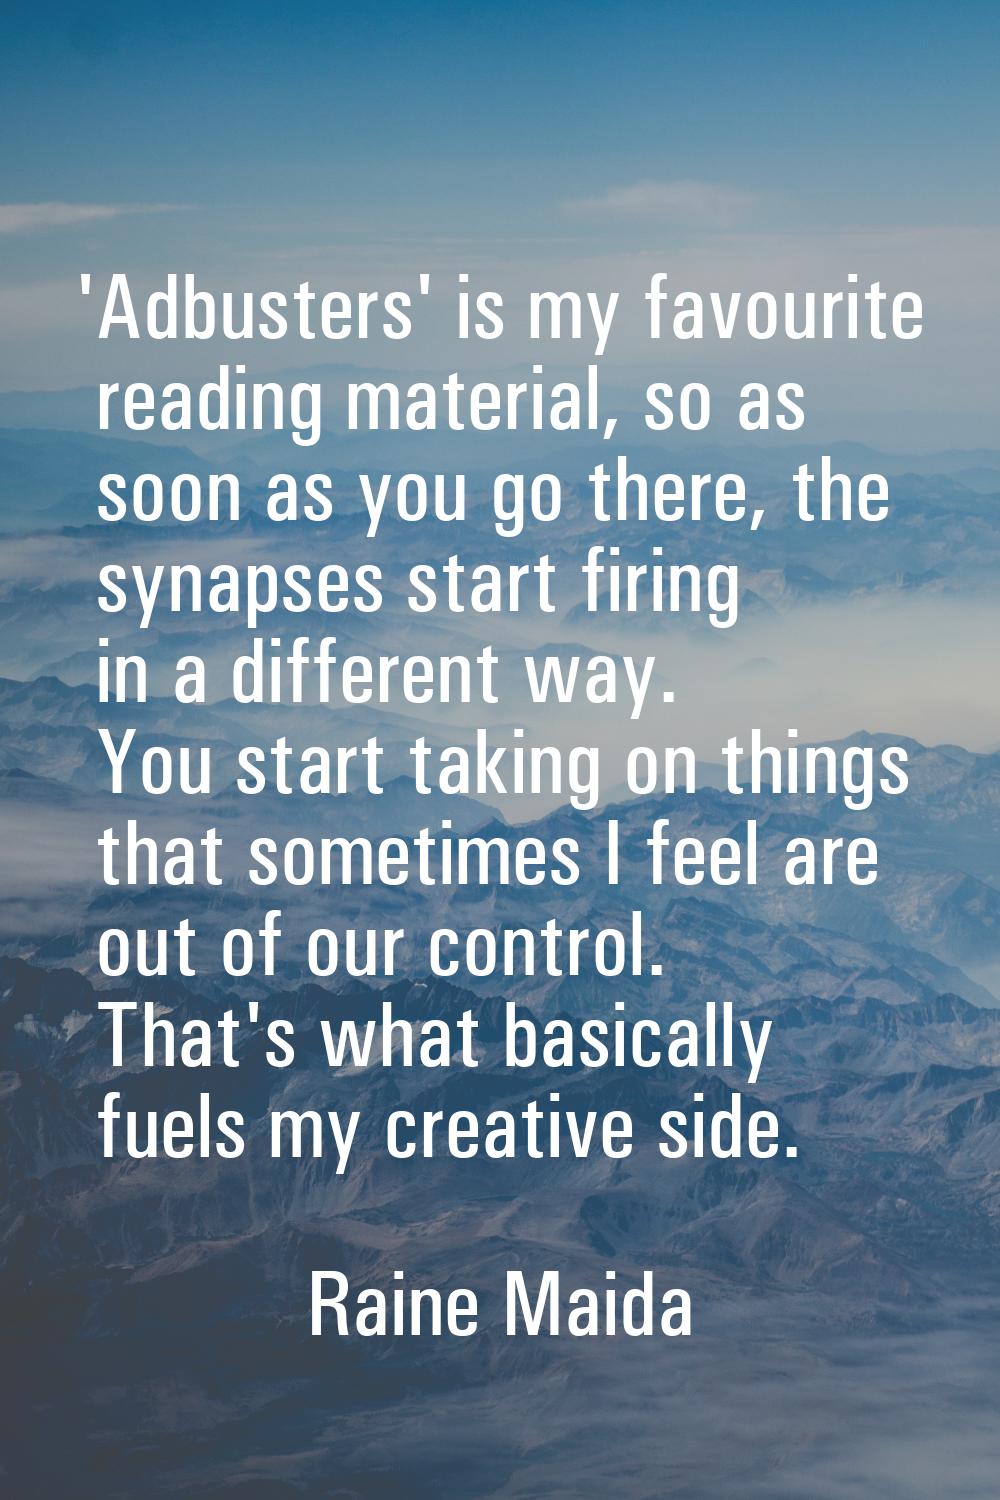 'Adbusters' is my favourite reading material, so as soon as you go there, the synapses start firing